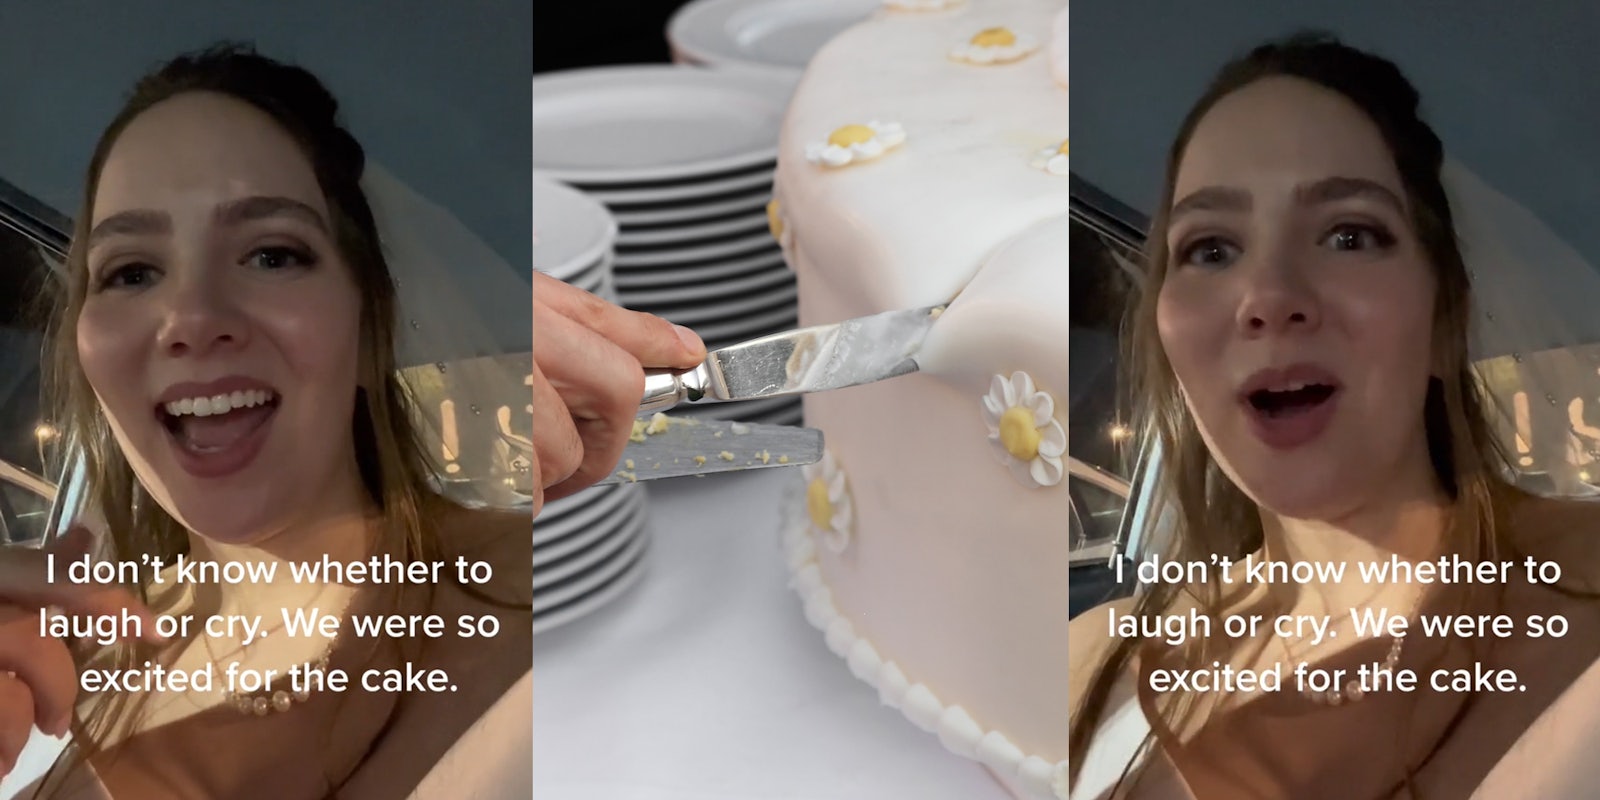 bride speaking in car with caption 'I don't know whether to laugh or cry. We were so excited for the cake.' (l) hand holding knife cutting into cake (c) bride speaking in car with caption 'I don't know whether to laugh or cry. We were so excited for the cake.' (r)